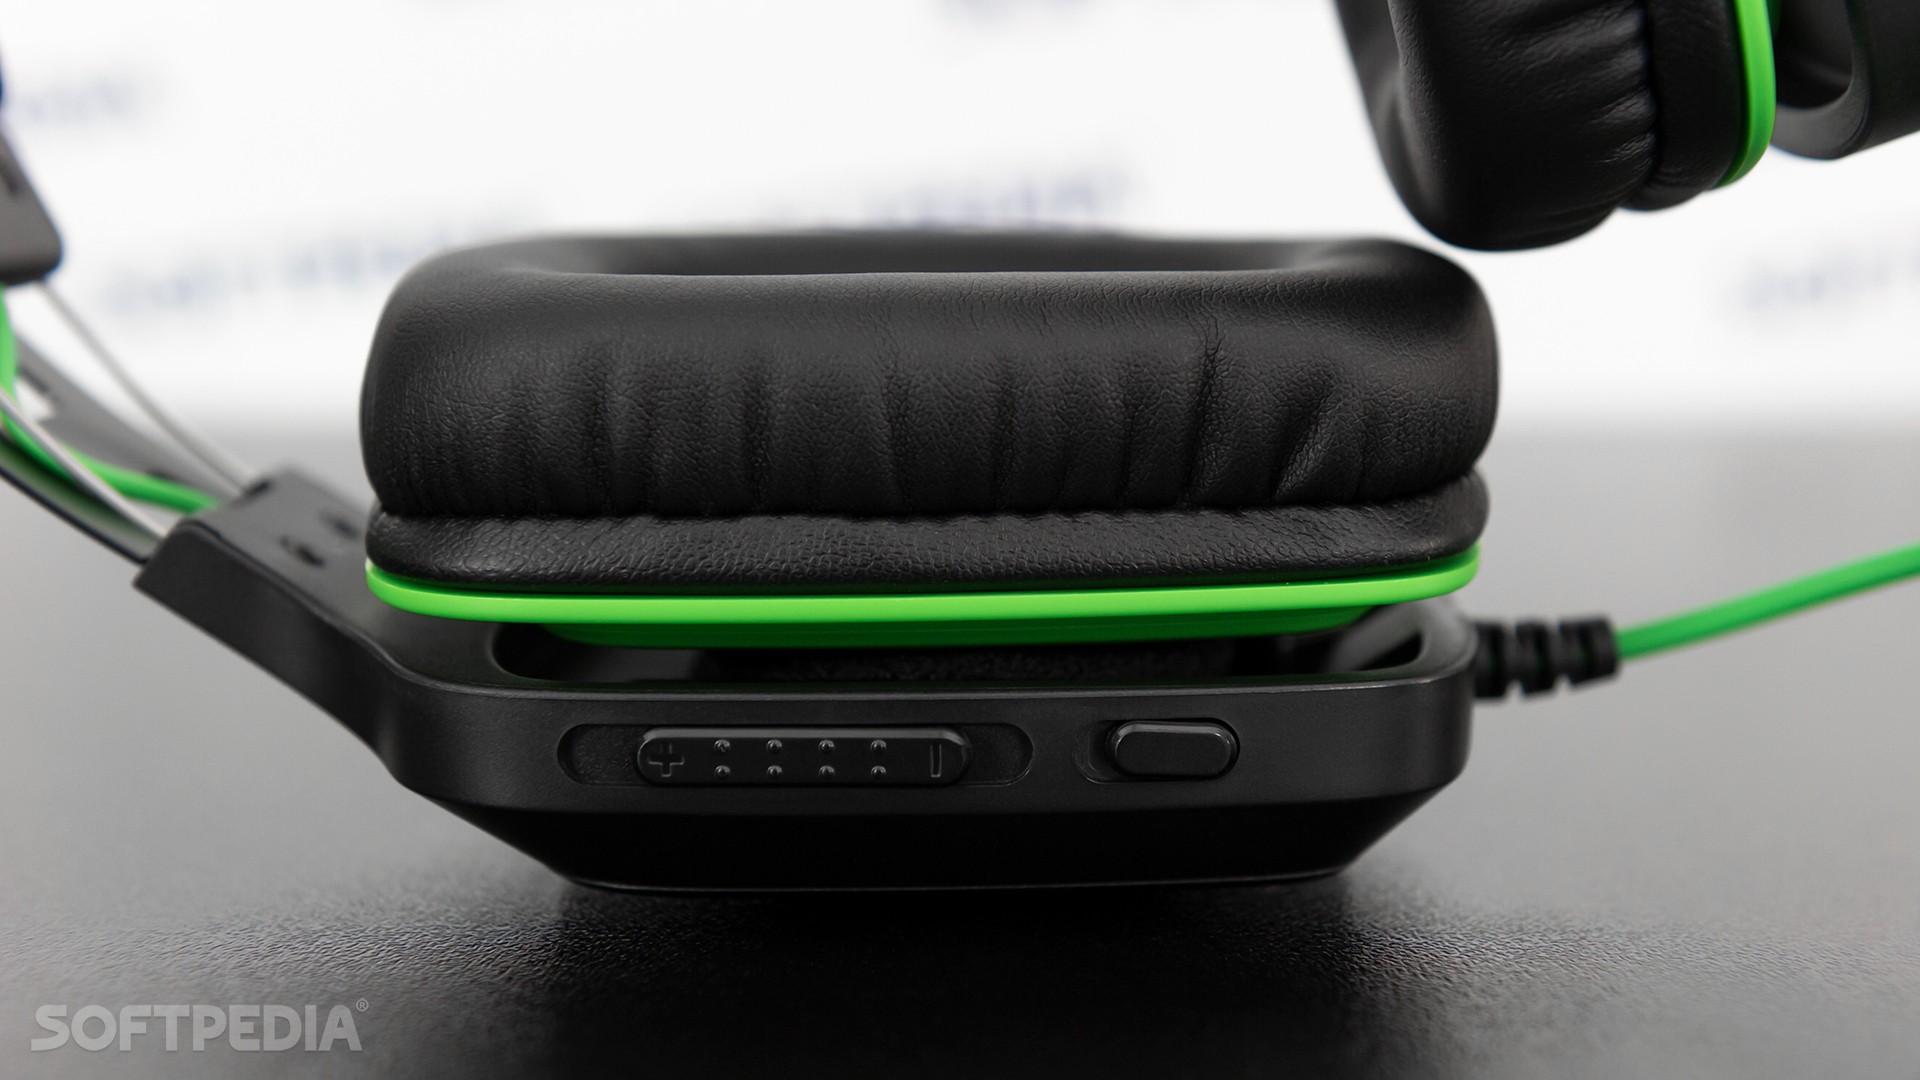 Uithoudingsvermogen Met andere bands touw Razer Electra V2 Review - The Headset a Gamer Should Want